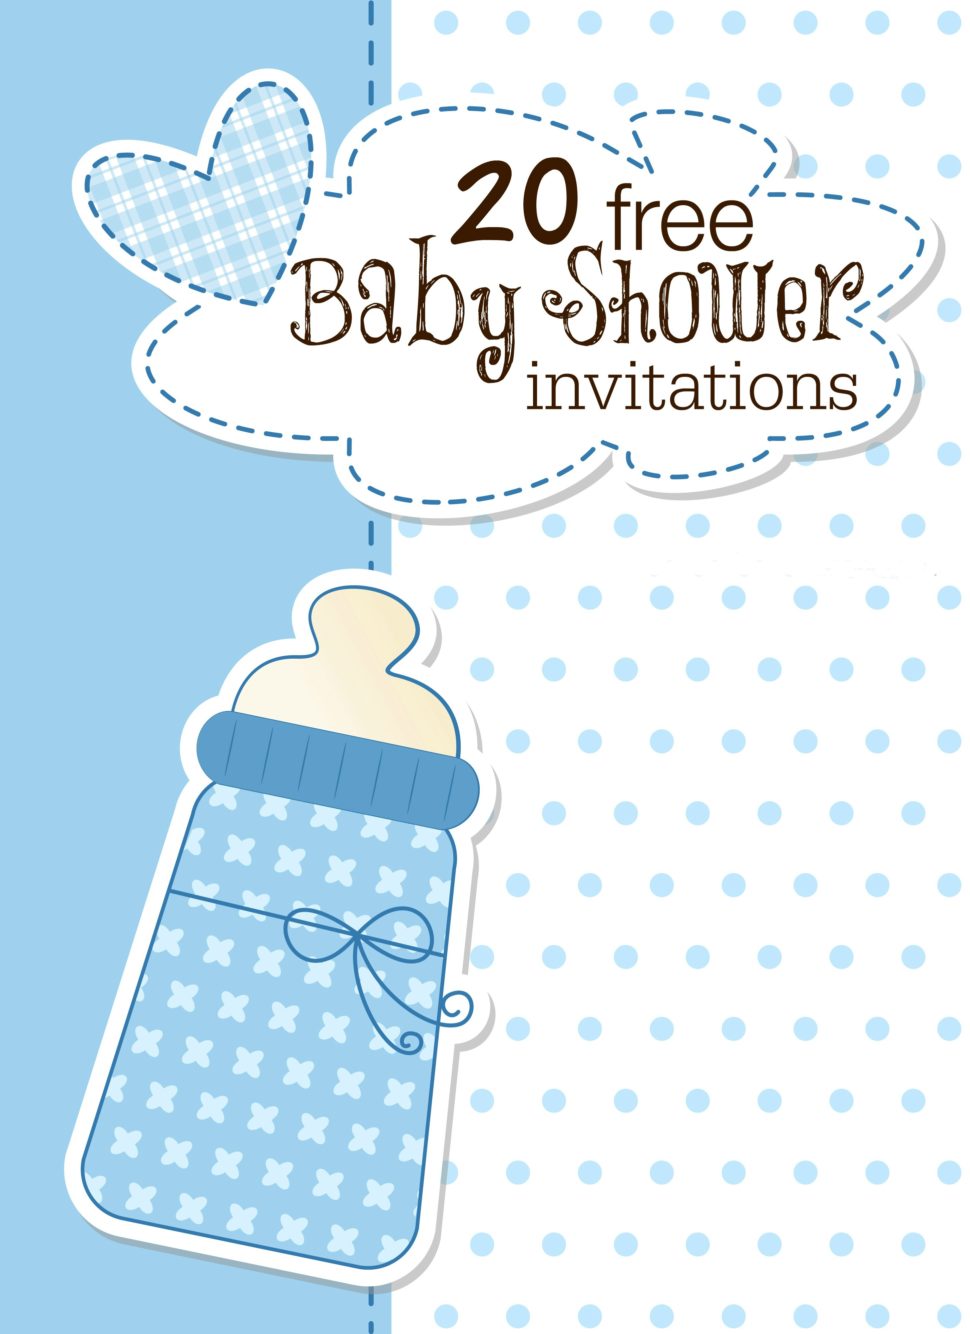 Medium Size of Baby Shower:nursery Themes For Girls Baby Girl Party Plates Girl Baby Shower Decorations Baby Shower Decorations For Girls Nautical Baby Shower Invitations For Boys Baby Girl Themes For Bedroom Baby Shower Ideas Baby Shower Decorations Themes For Baby Girl Nursery